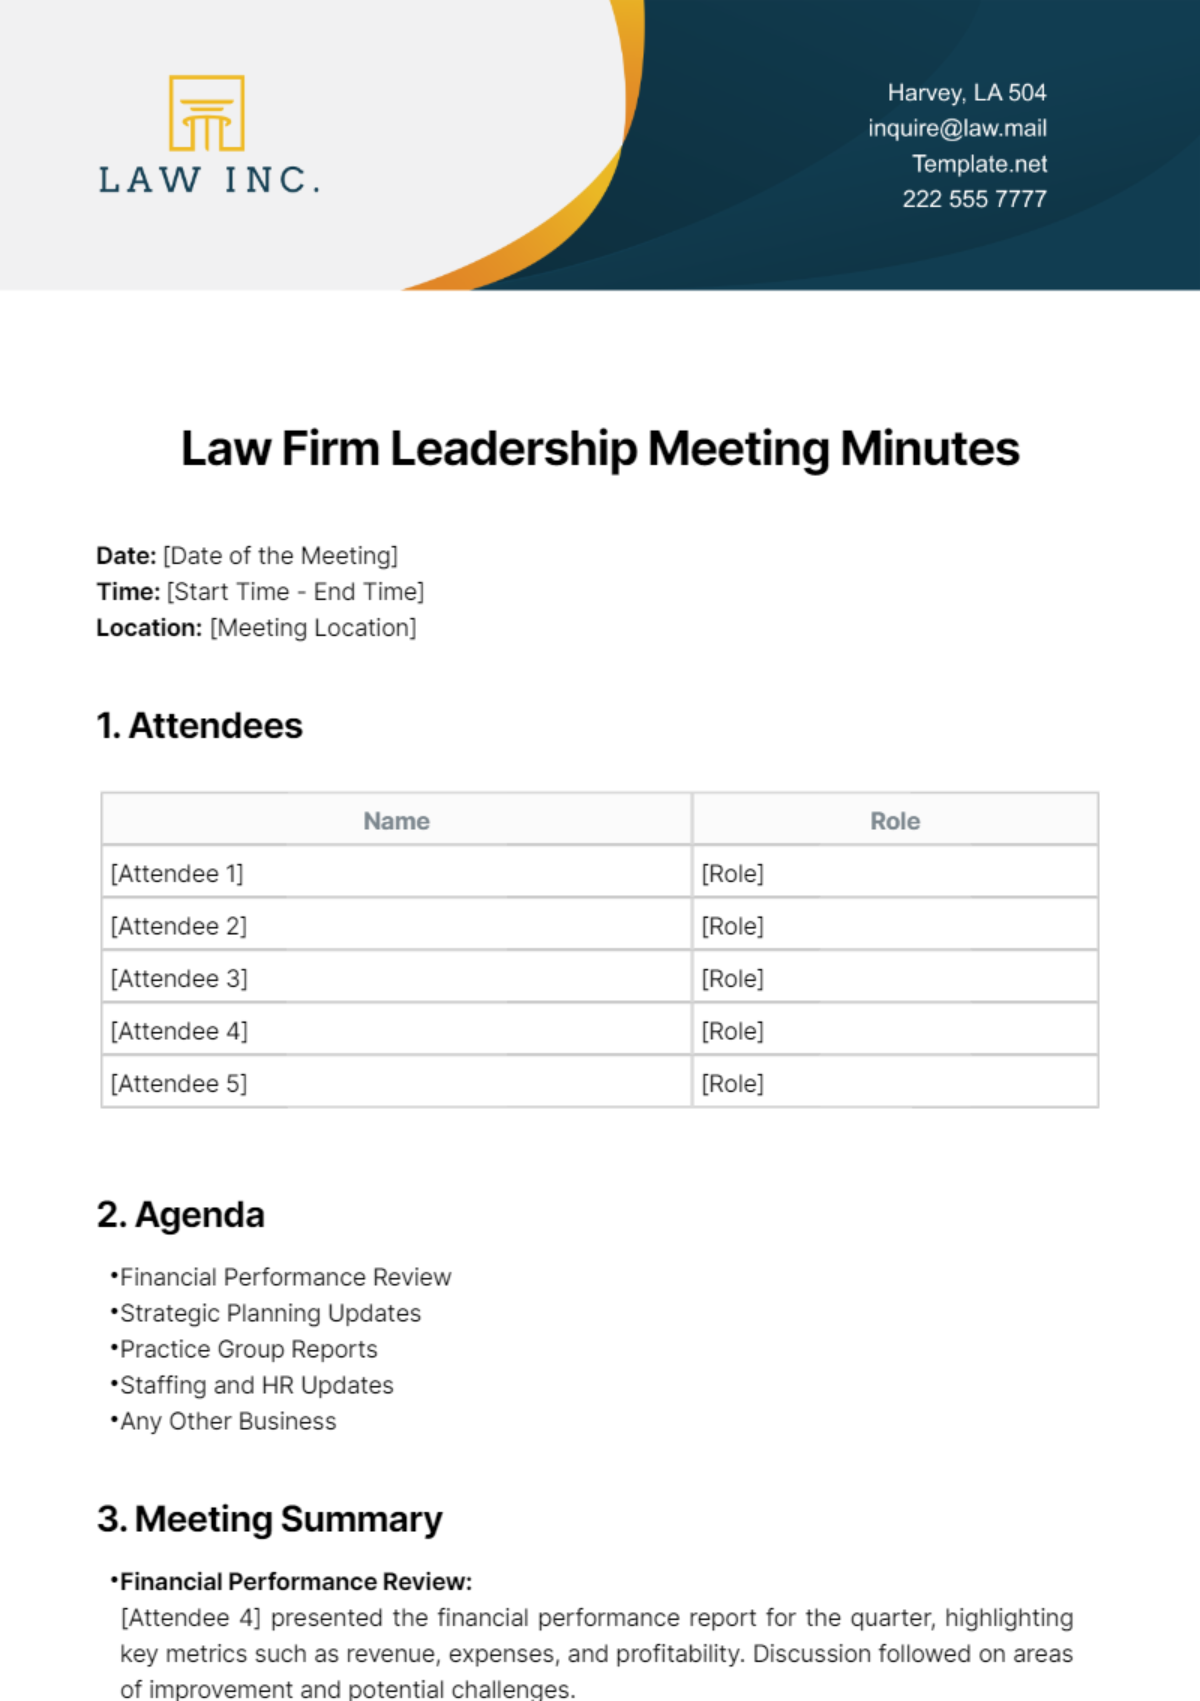 Law Firm Leadership Meeting Minutes Template